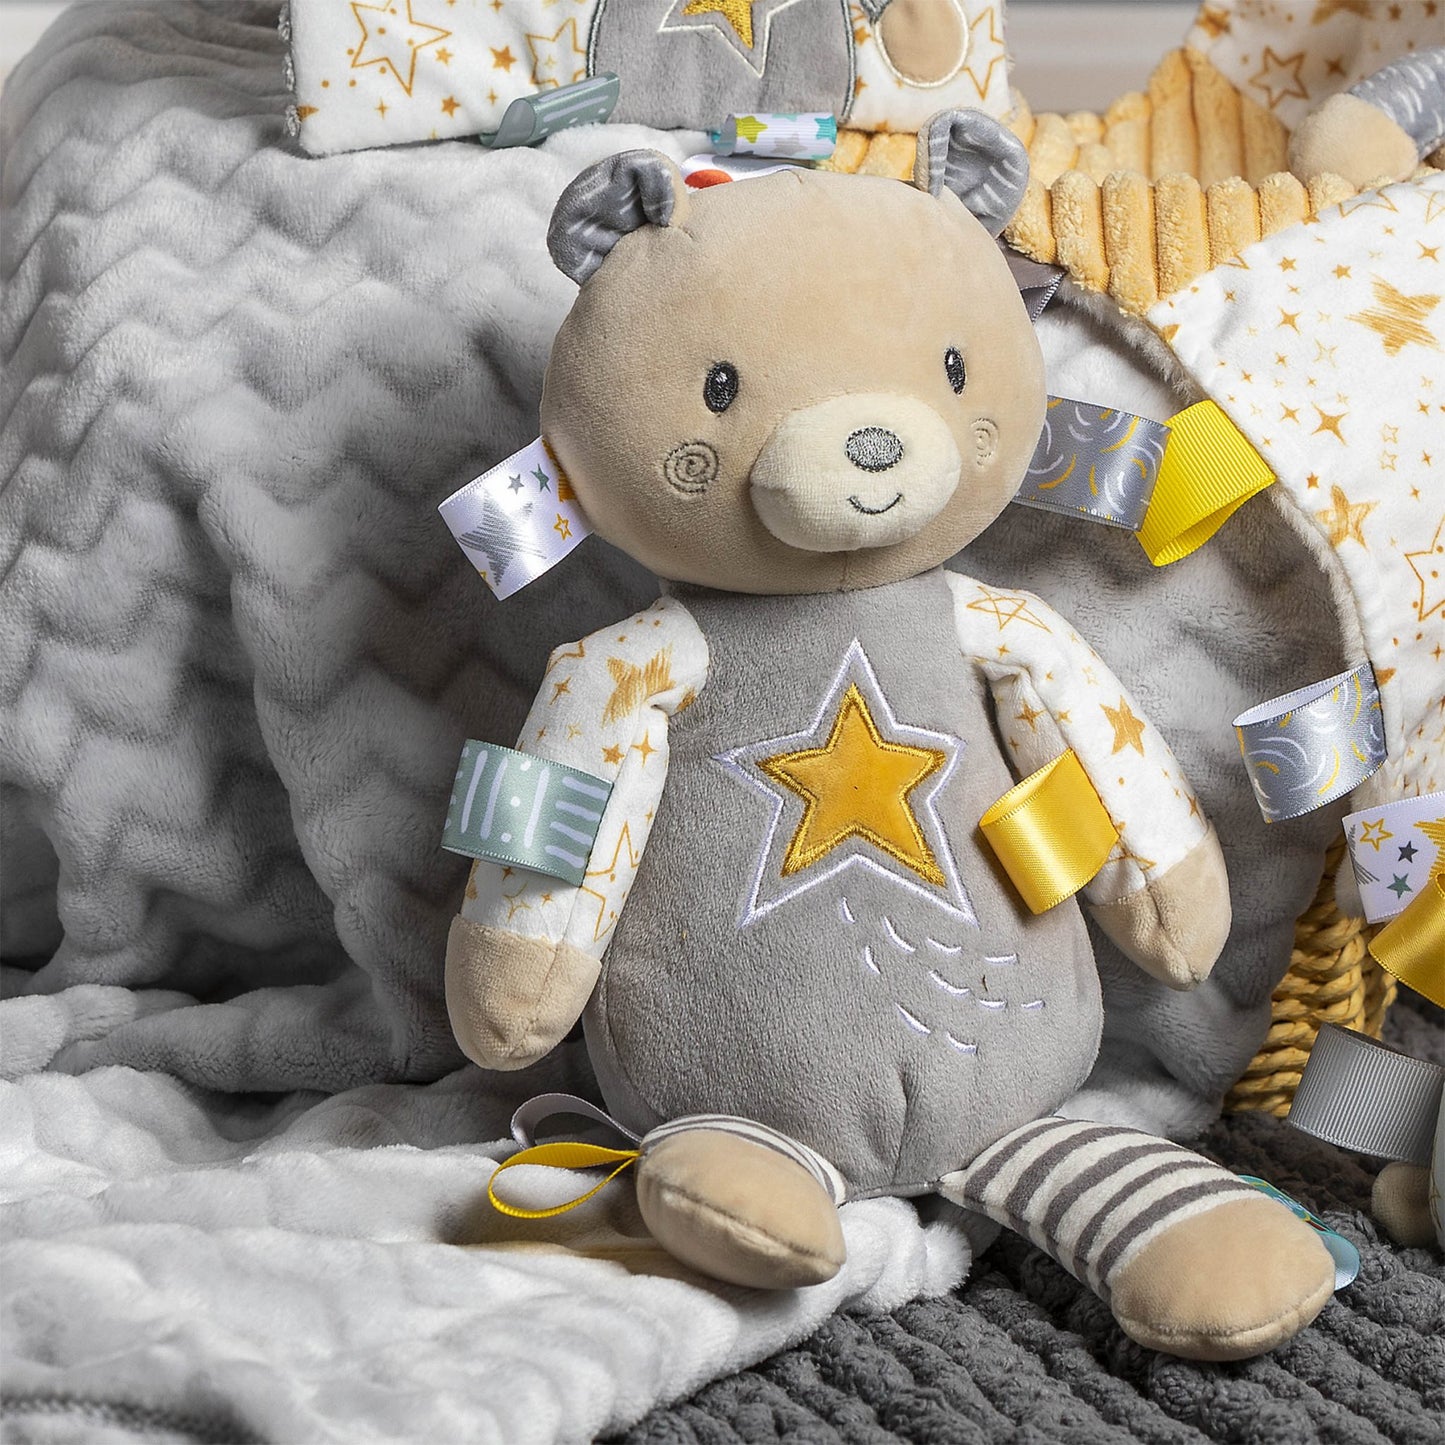 be a star soft toy displayed on multiple gray blankets in different shades of gray